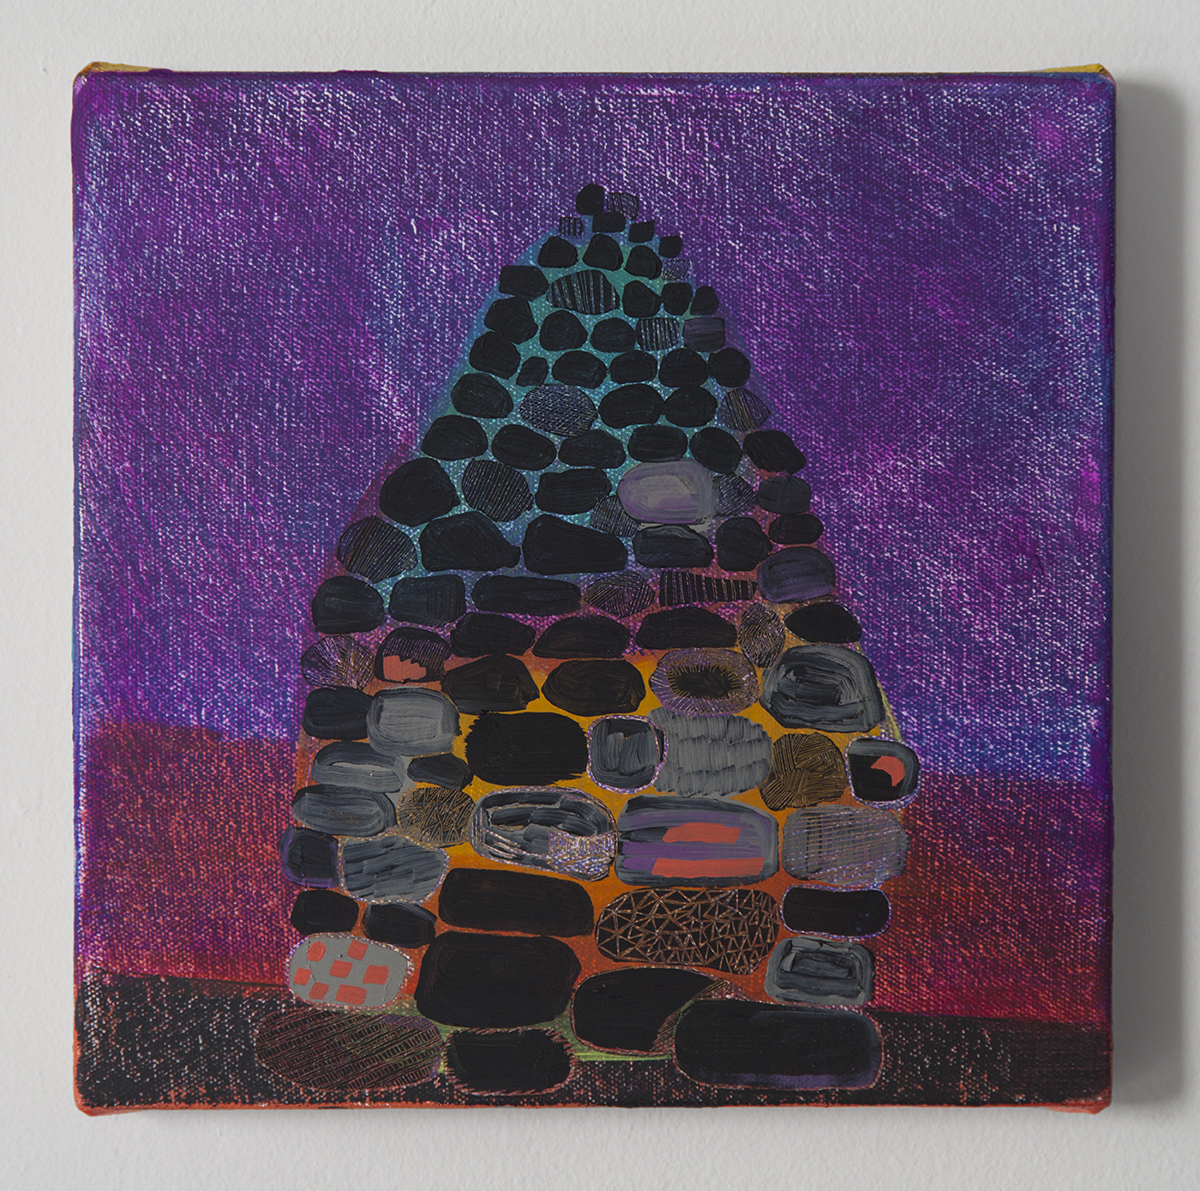  Magic Cairn #1, Oil and cold wax on canvas, 9” x 9”  